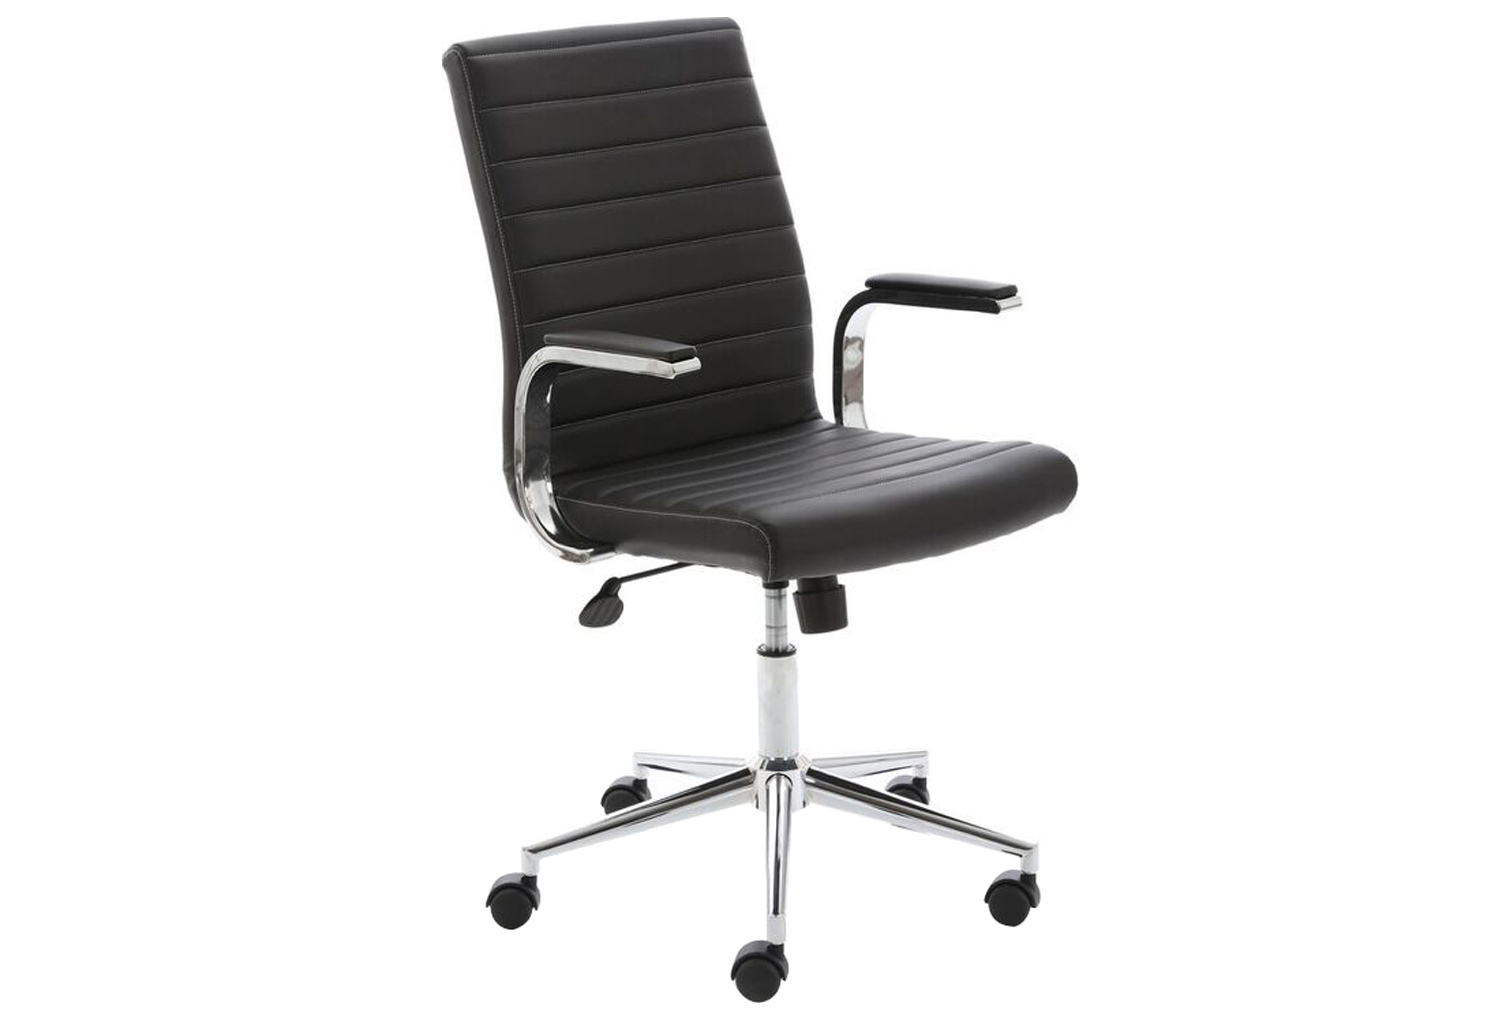 Wexford Executive Bonded Leather Office Chair (Black), Express Delivery